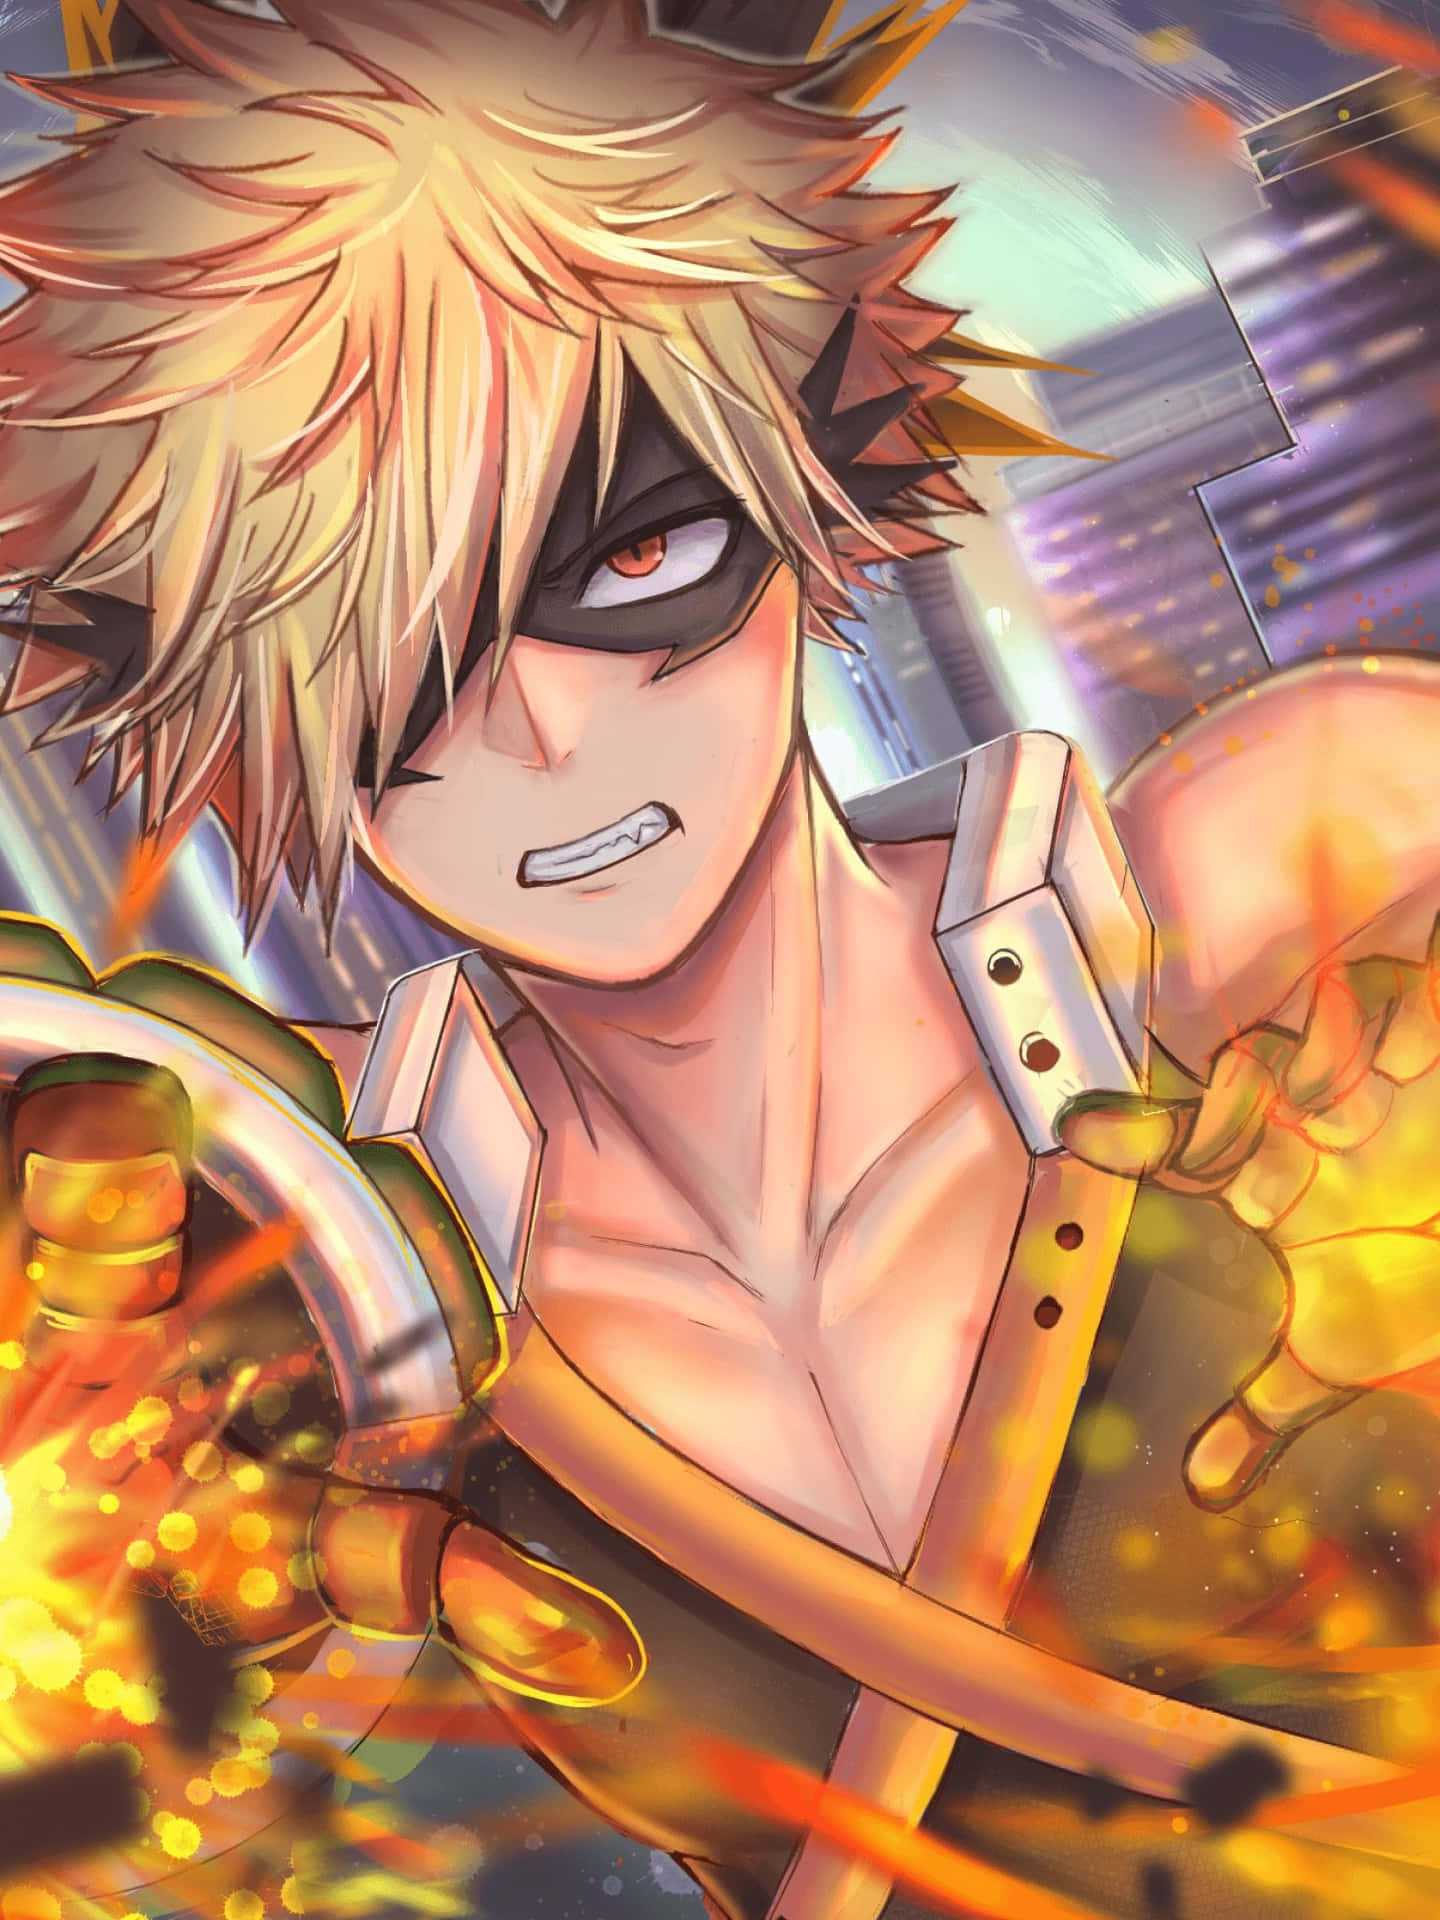 Bakugou,redo Att Kämpa. (assuming This Is A Phrase To Be Used As A Caption Or Title For A Computer Or Mobile Wallpaper Featuring Bakugou In A Fighting Pose.)